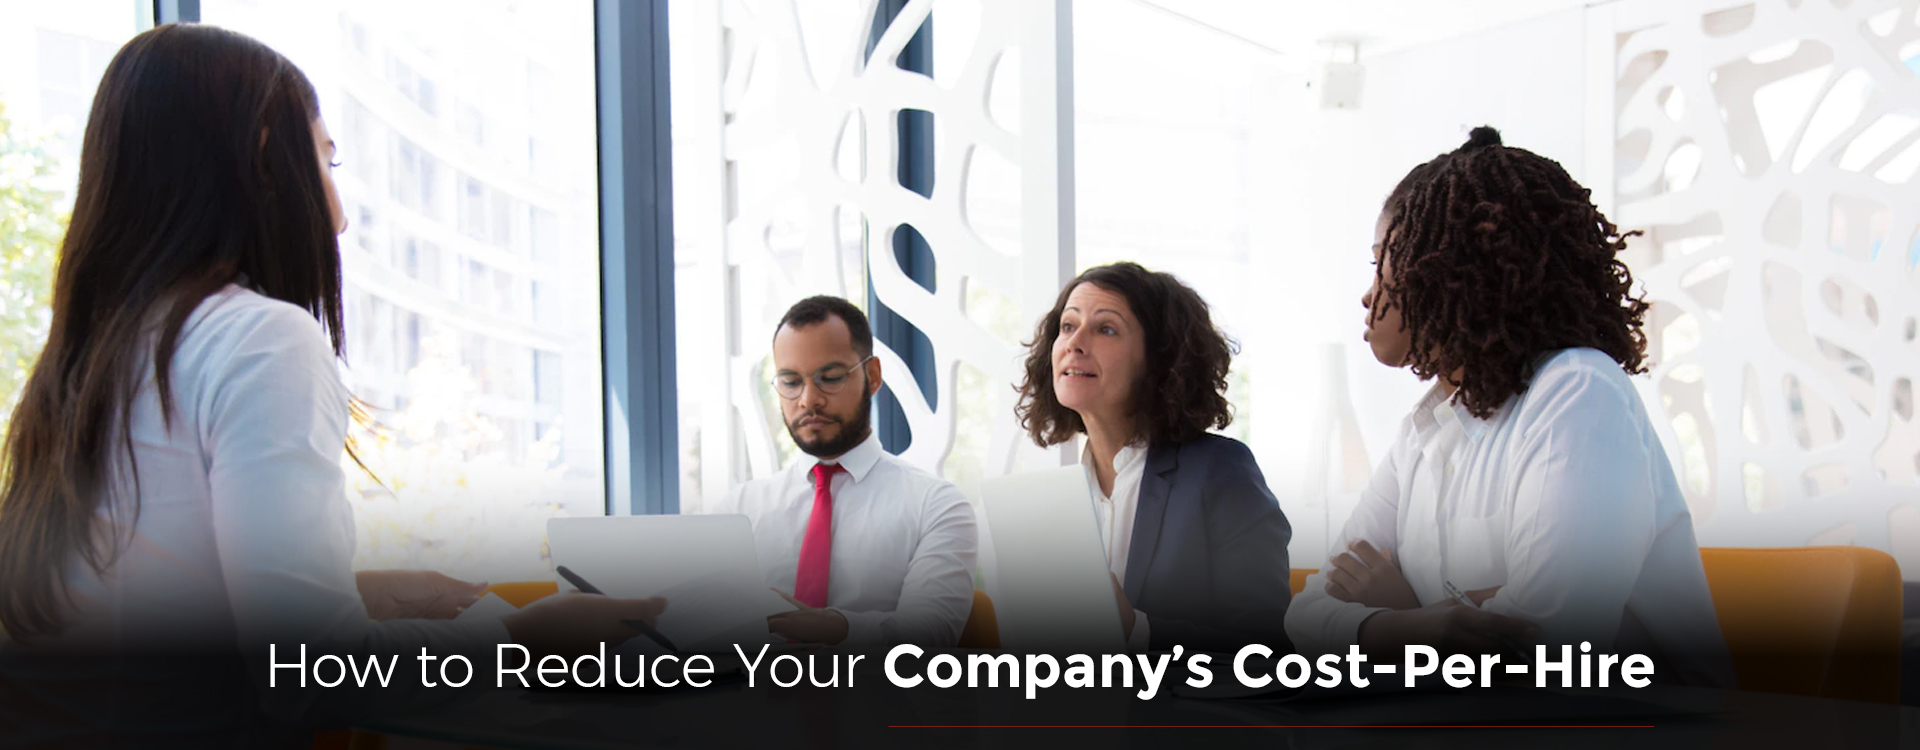 How to Reduce Your Company’s Cost-Per-Hire